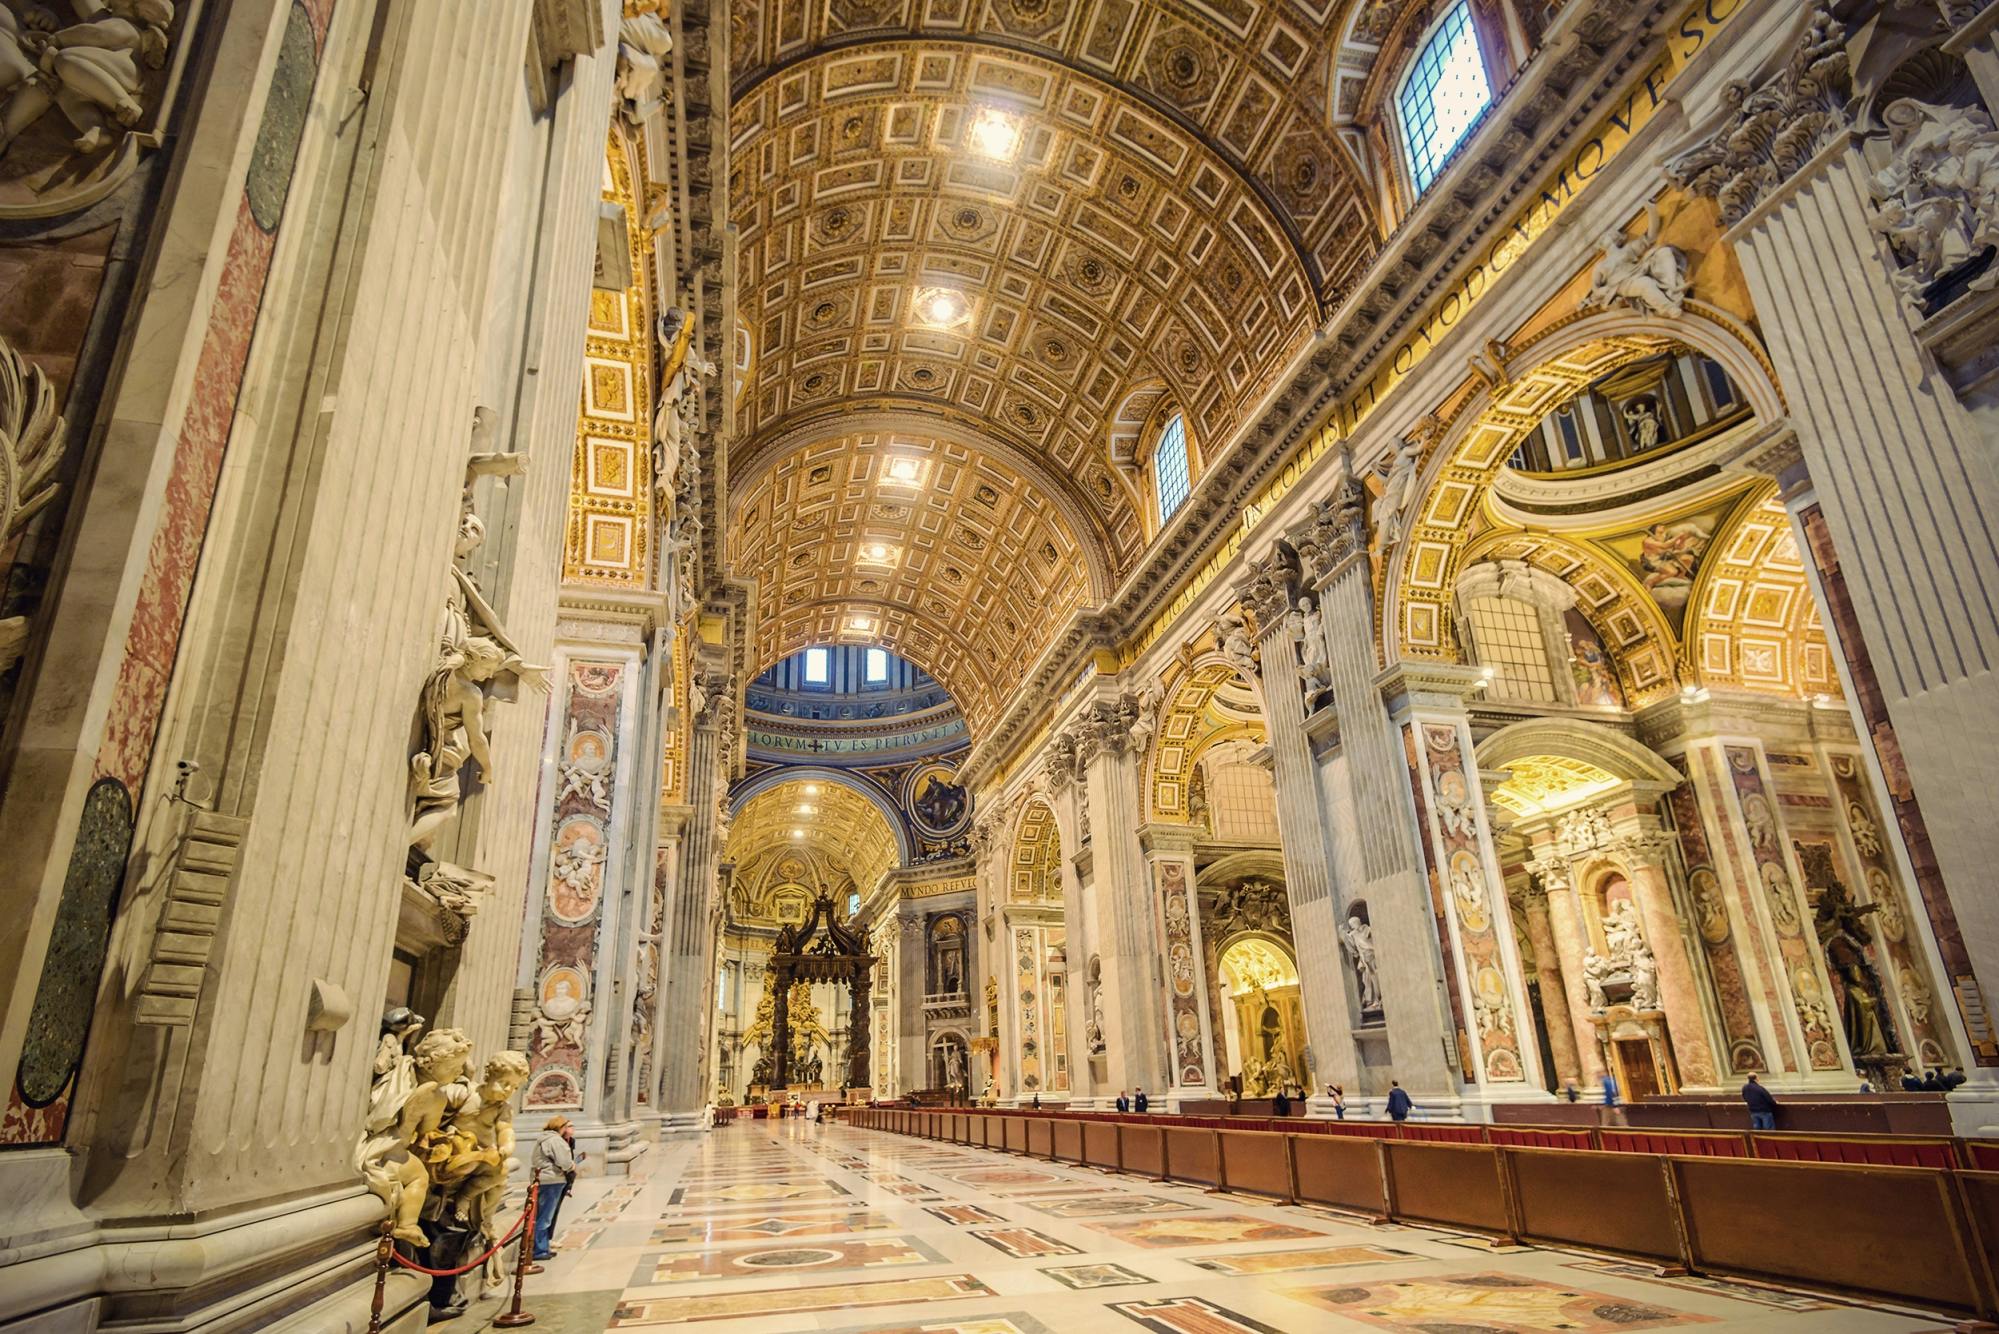 St. Peter's Basilica Guided Tour and Dome Entrance Ticket